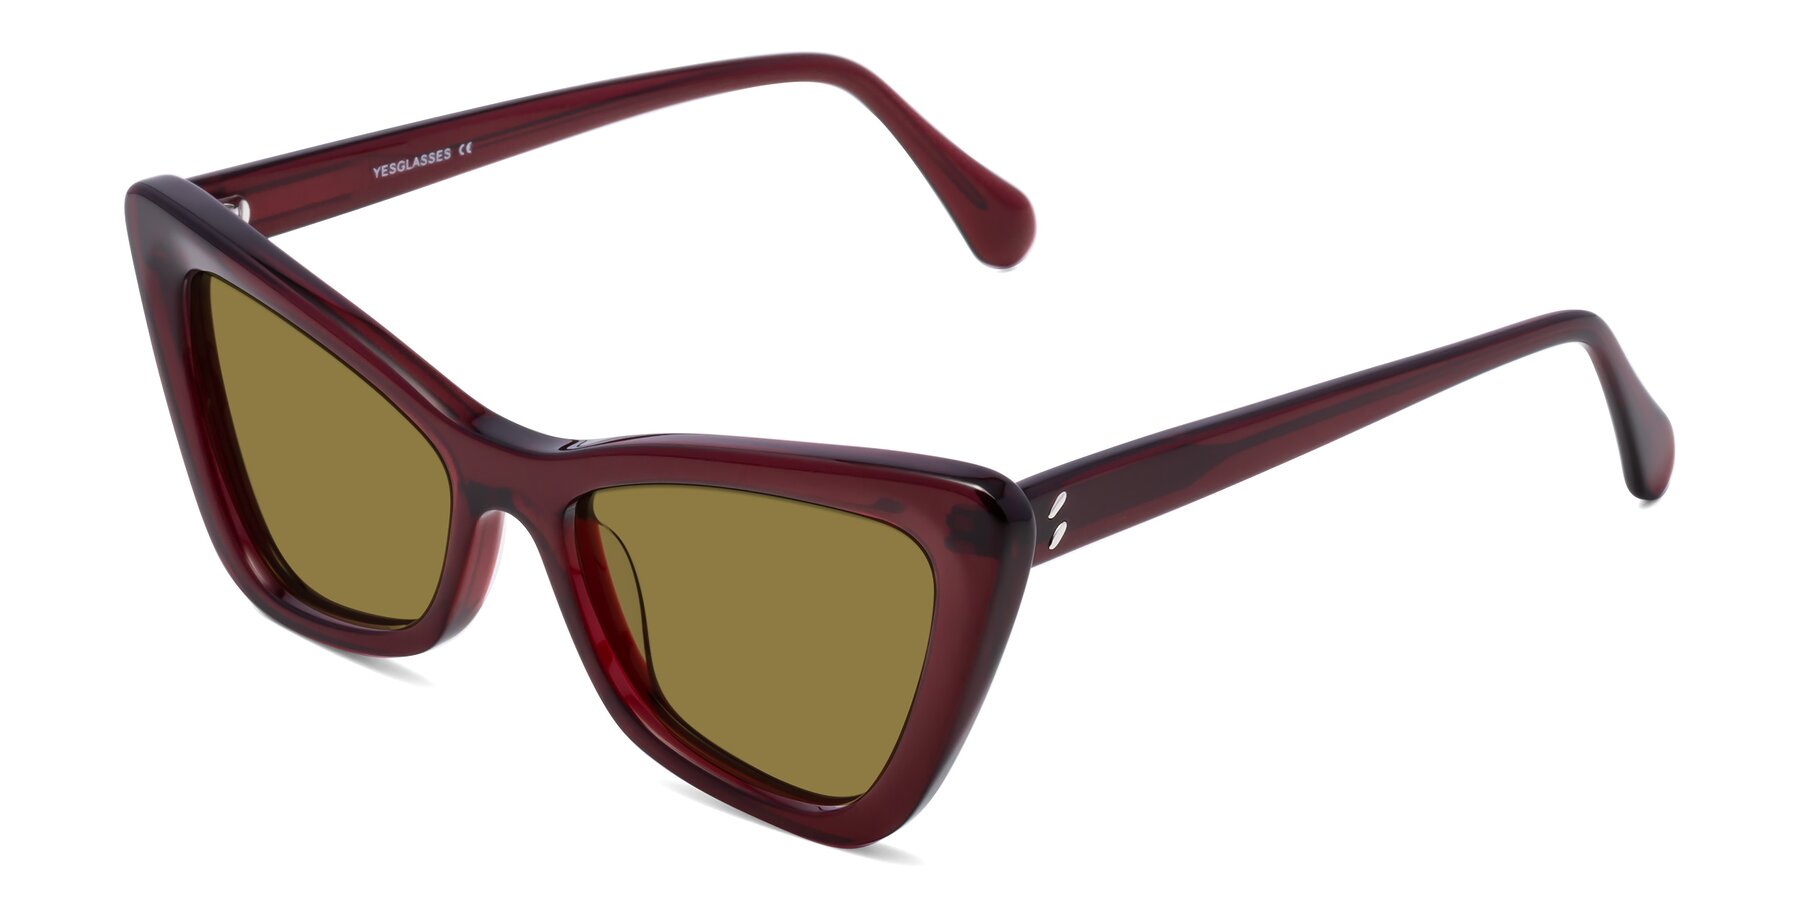 Angle of Rua in Wine with Brown Polarized Lenses